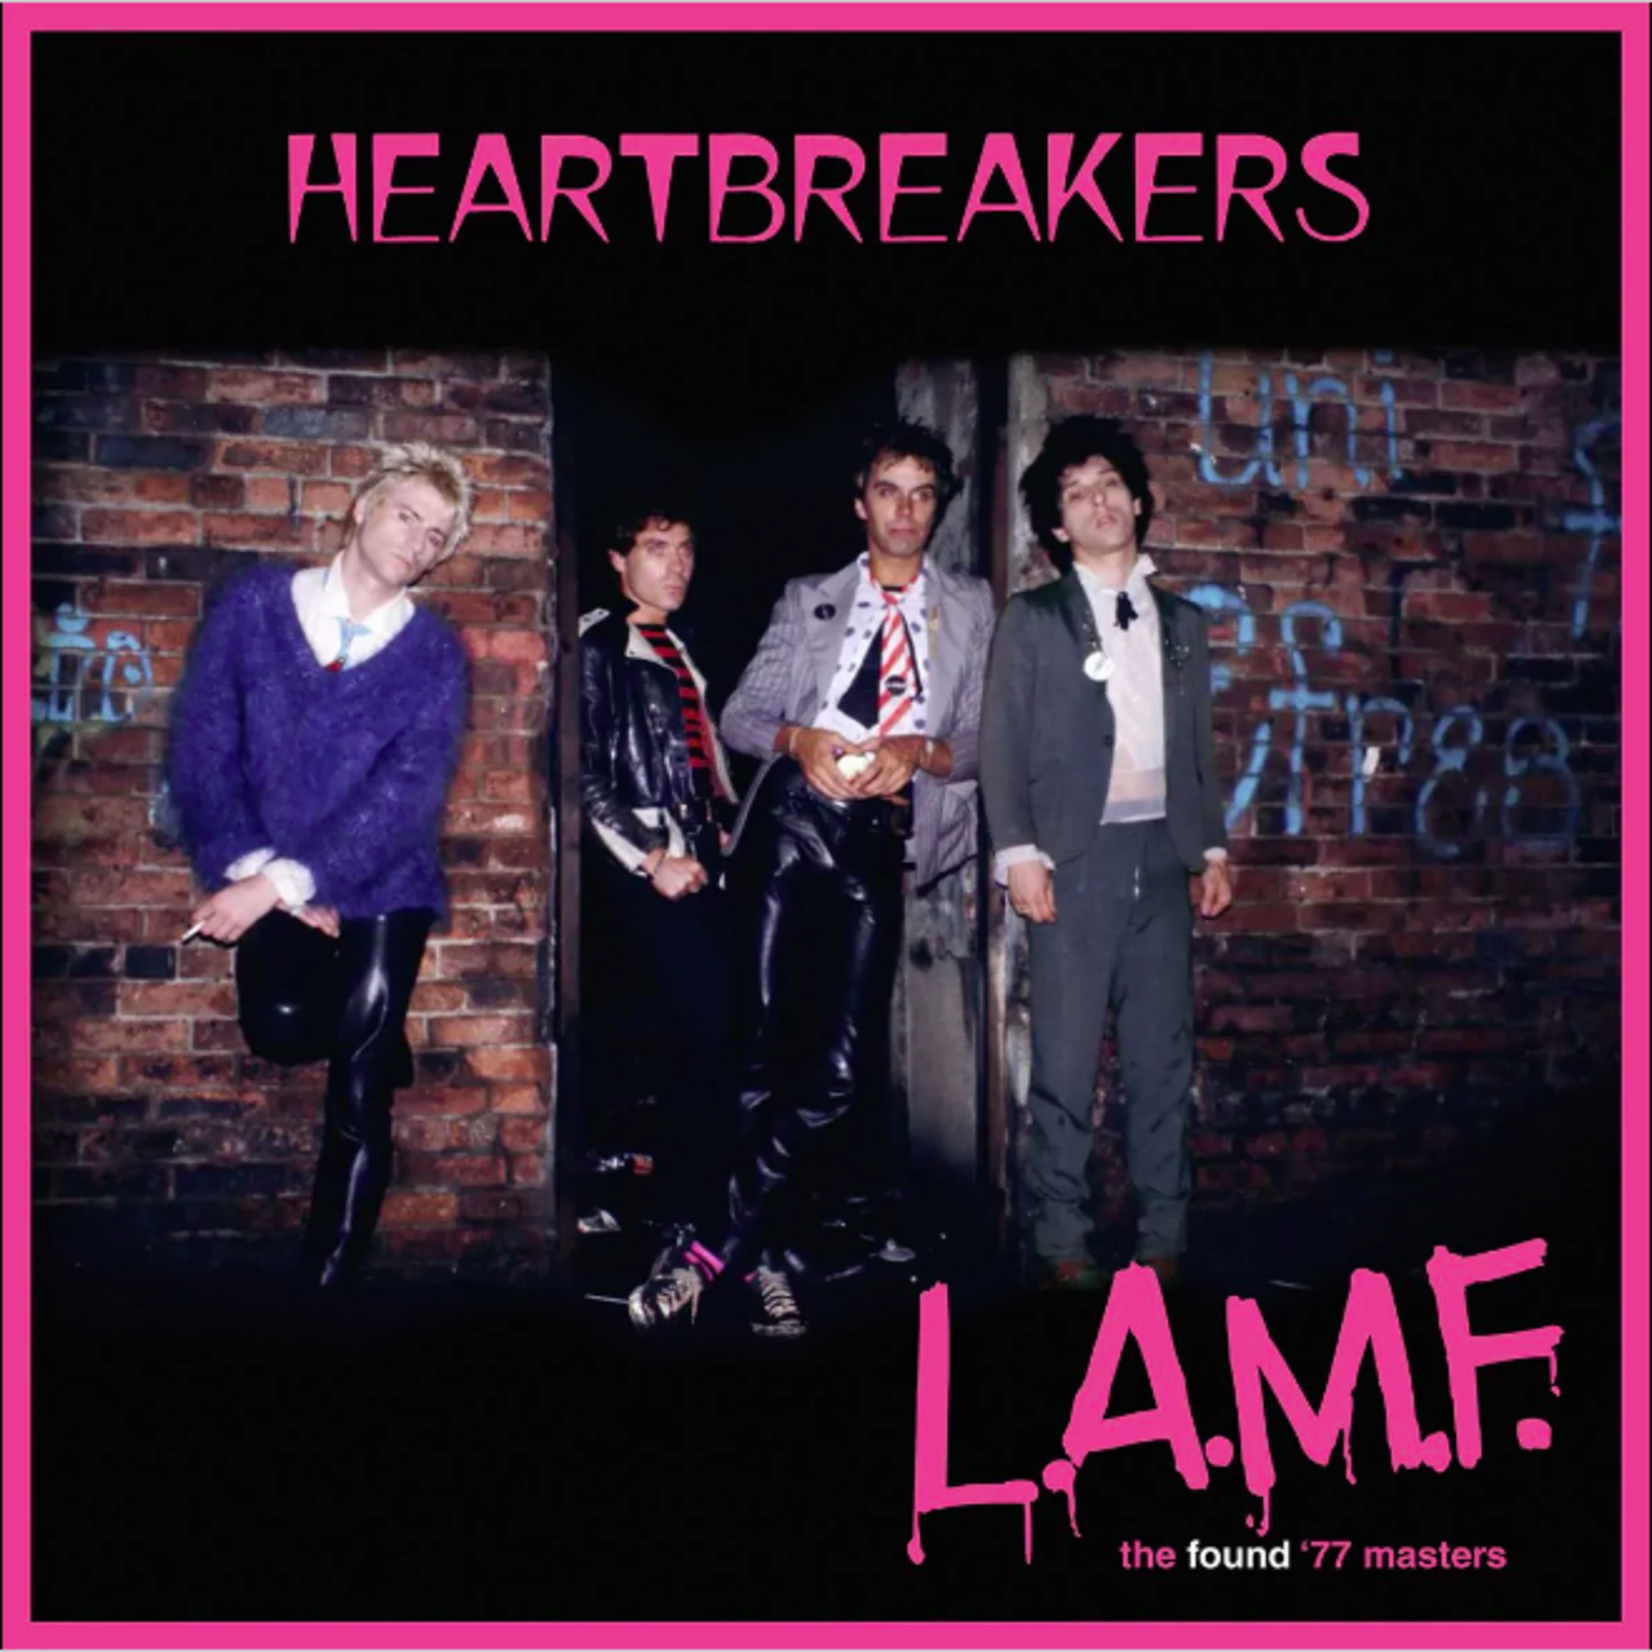 [New] Heartbreakers - L.A.M.F.: The Found '77 Masters (RSD Essentials, neon pink & white vinyl)